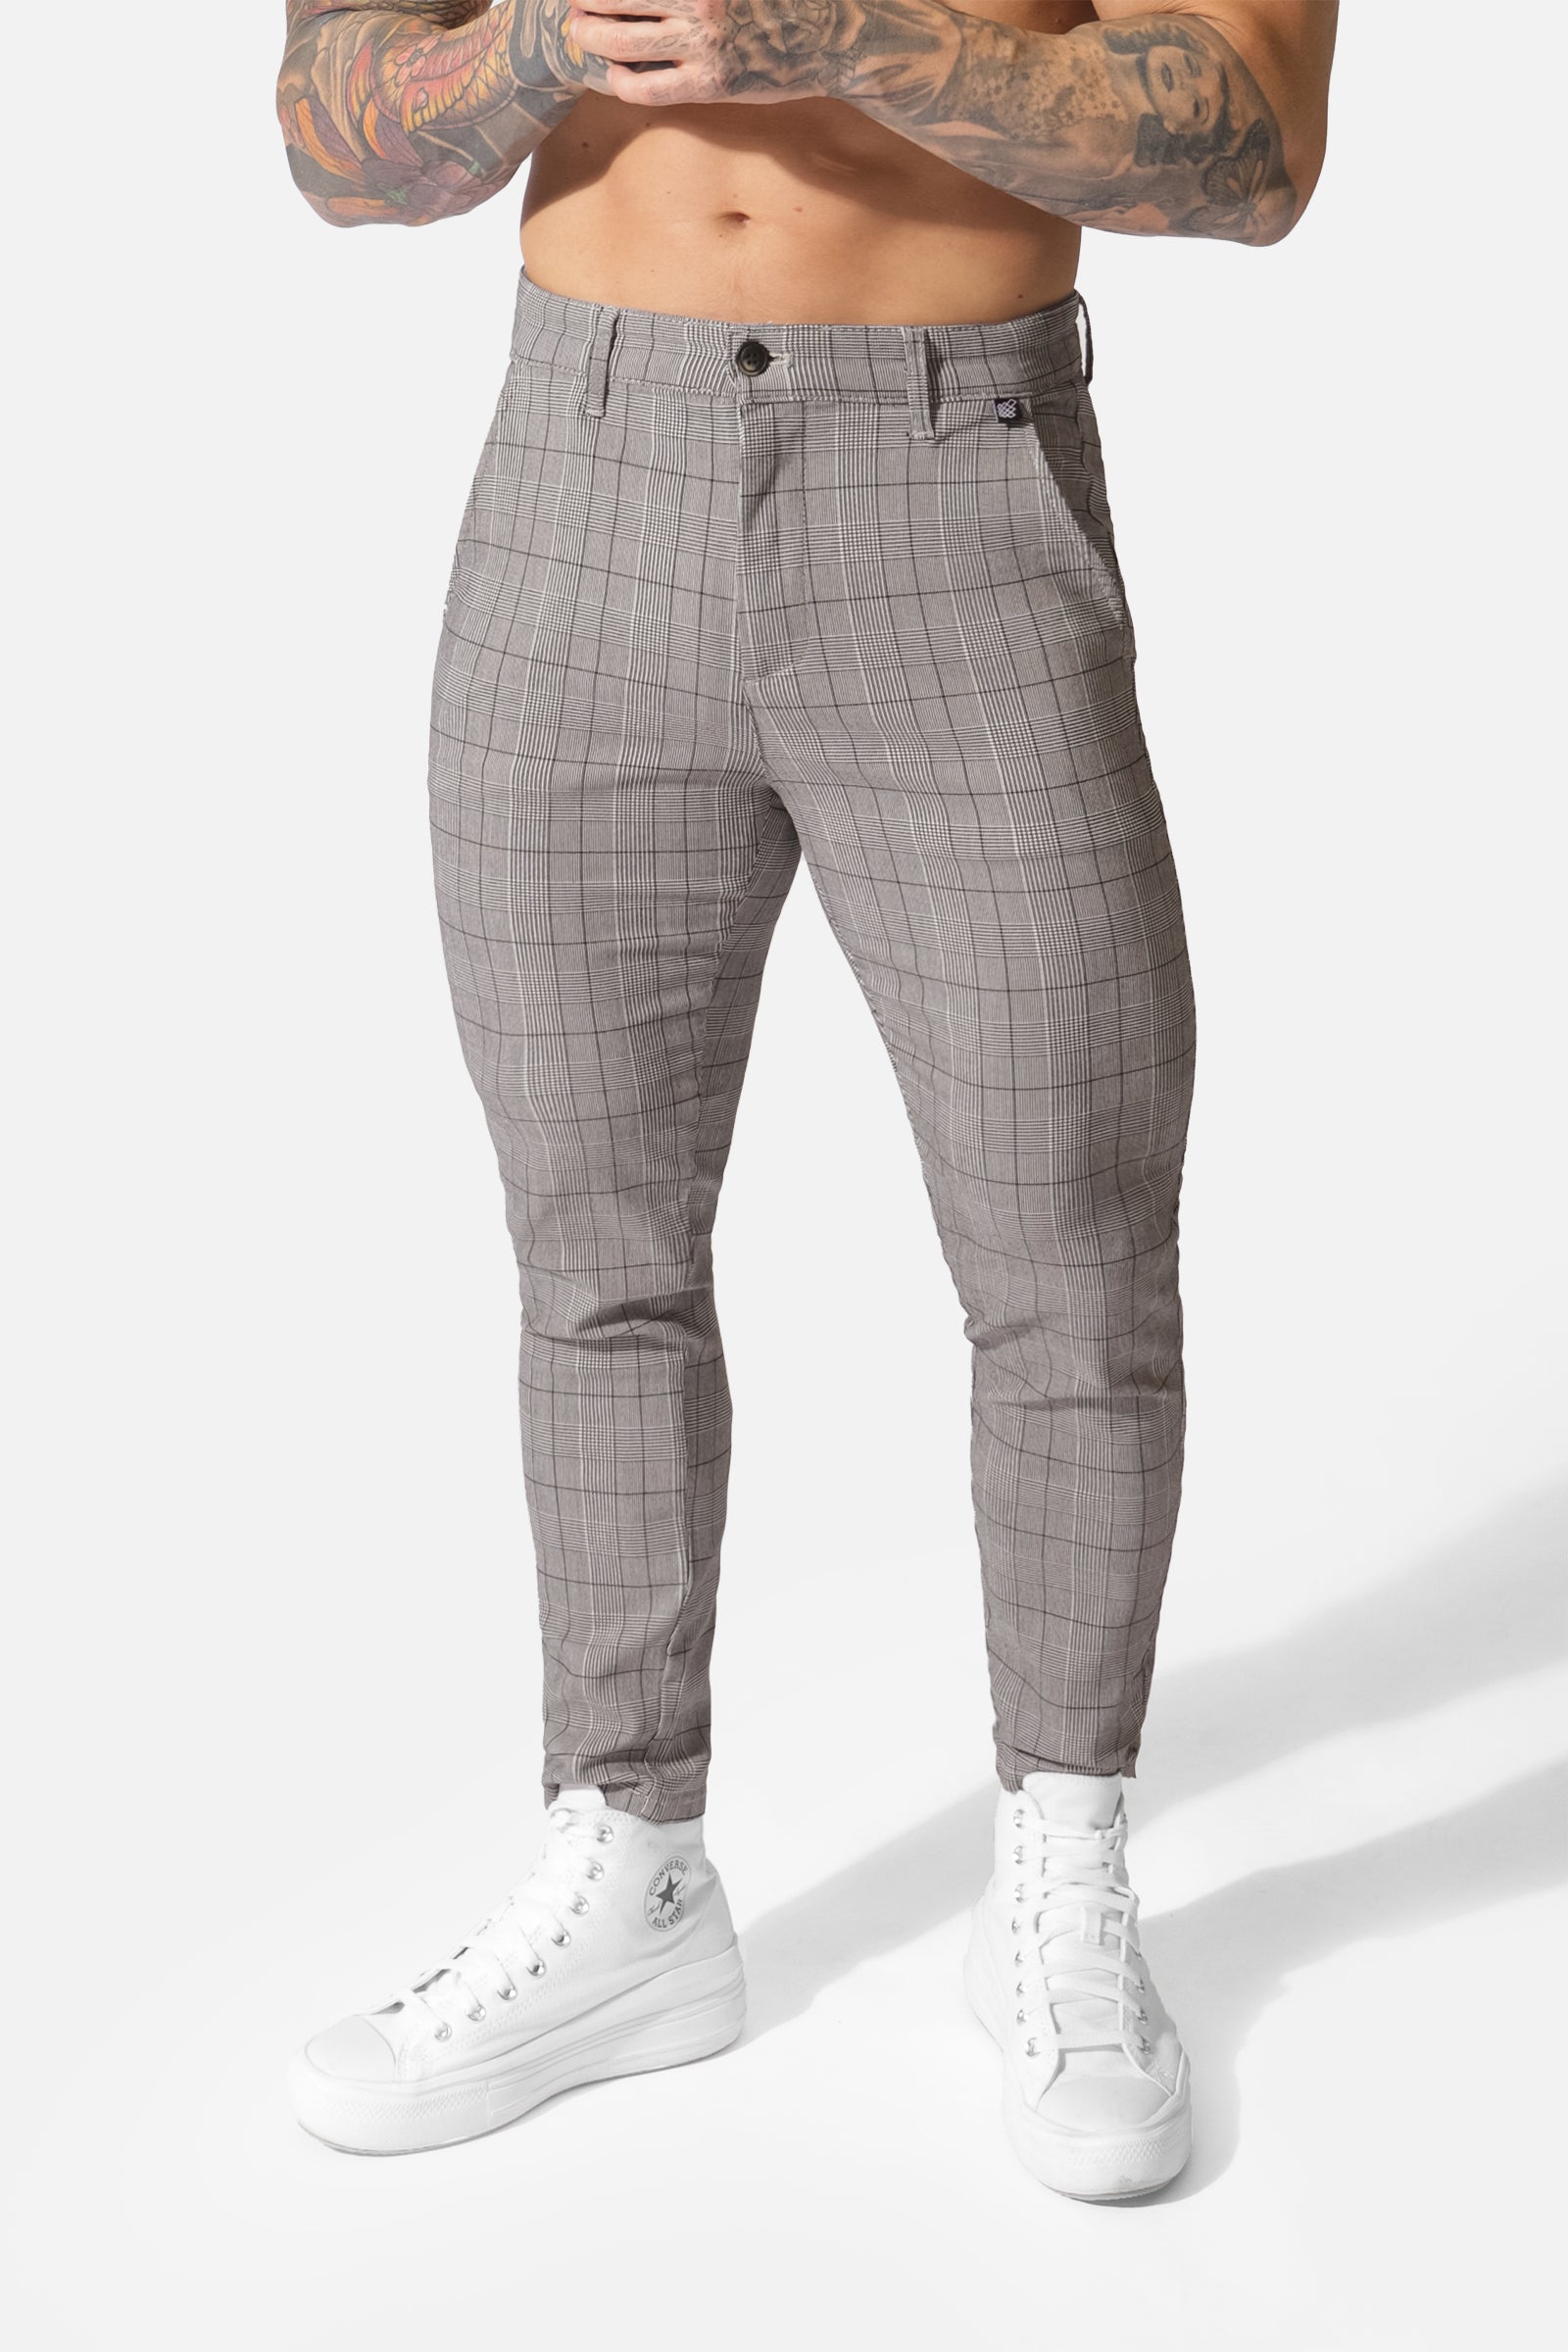 Men's Fitted Stretchy Pants - Checker